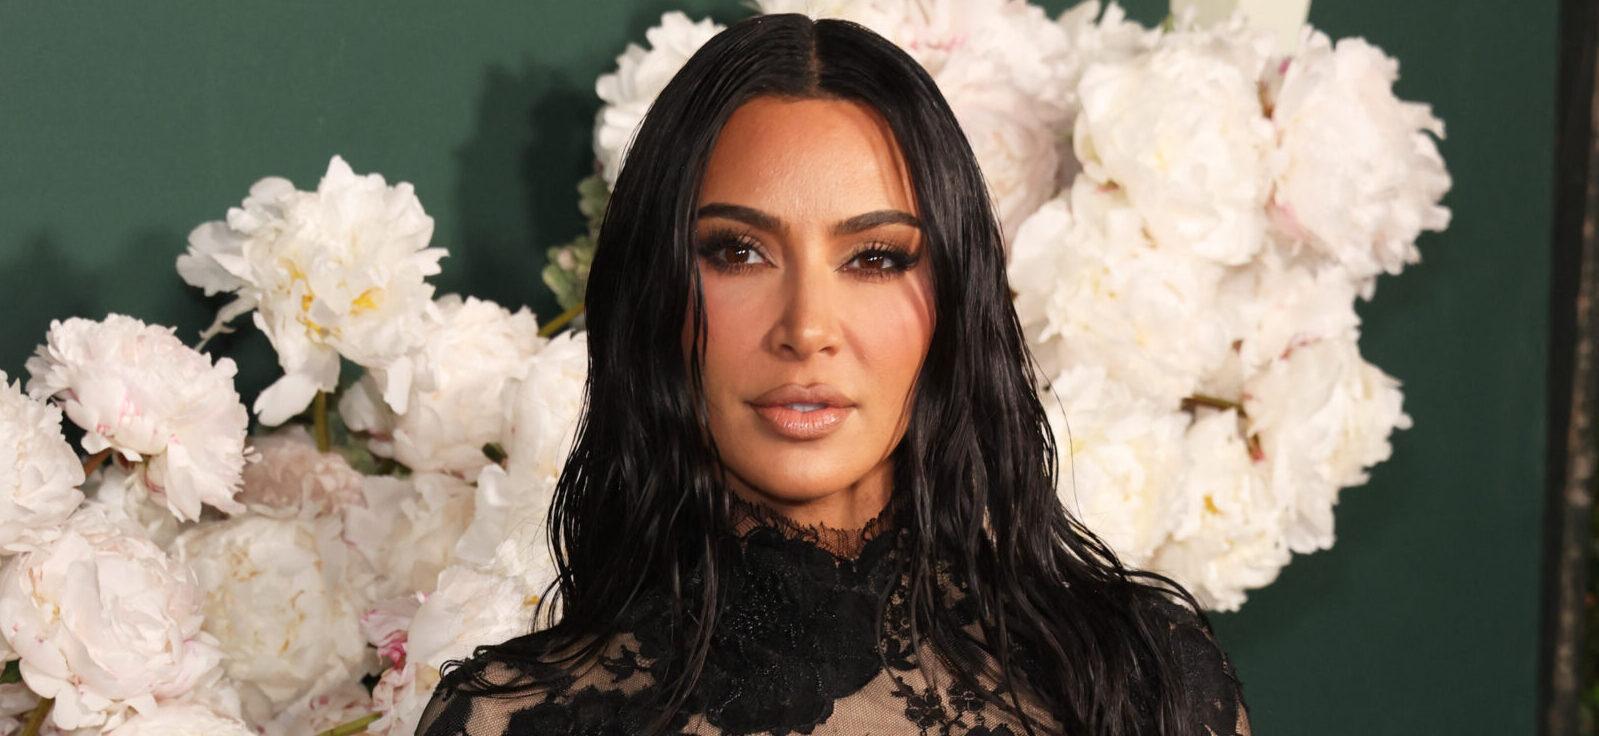 Kim Kardashian Compares Adorable Throwback Photo Of Herself To Her ‘Twin’ Chicago